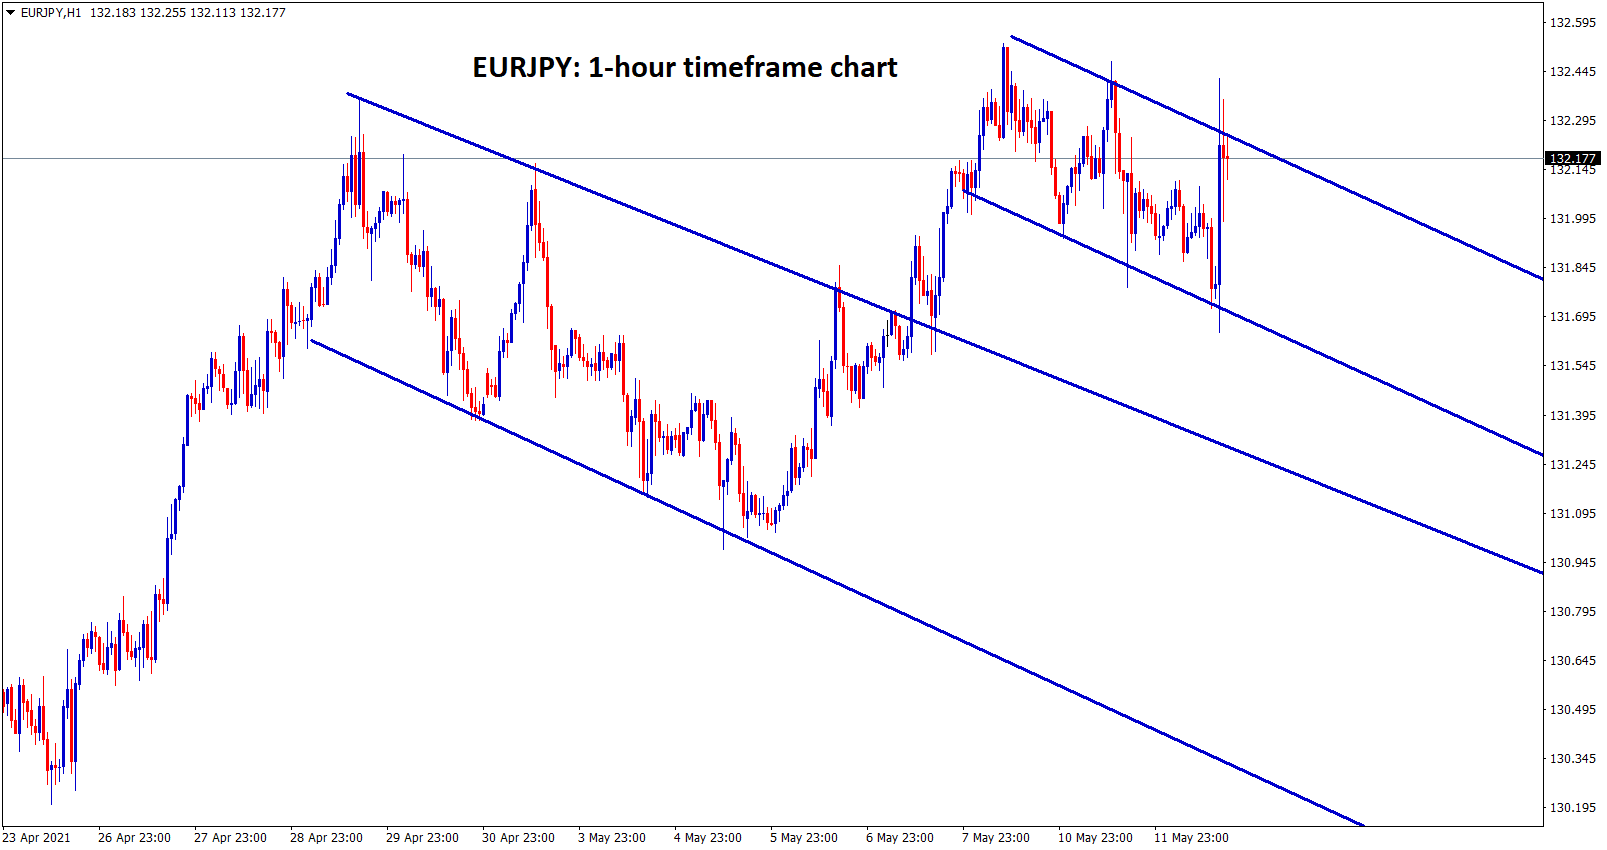 EURJPY formed a flag patterns in the h1 chart.